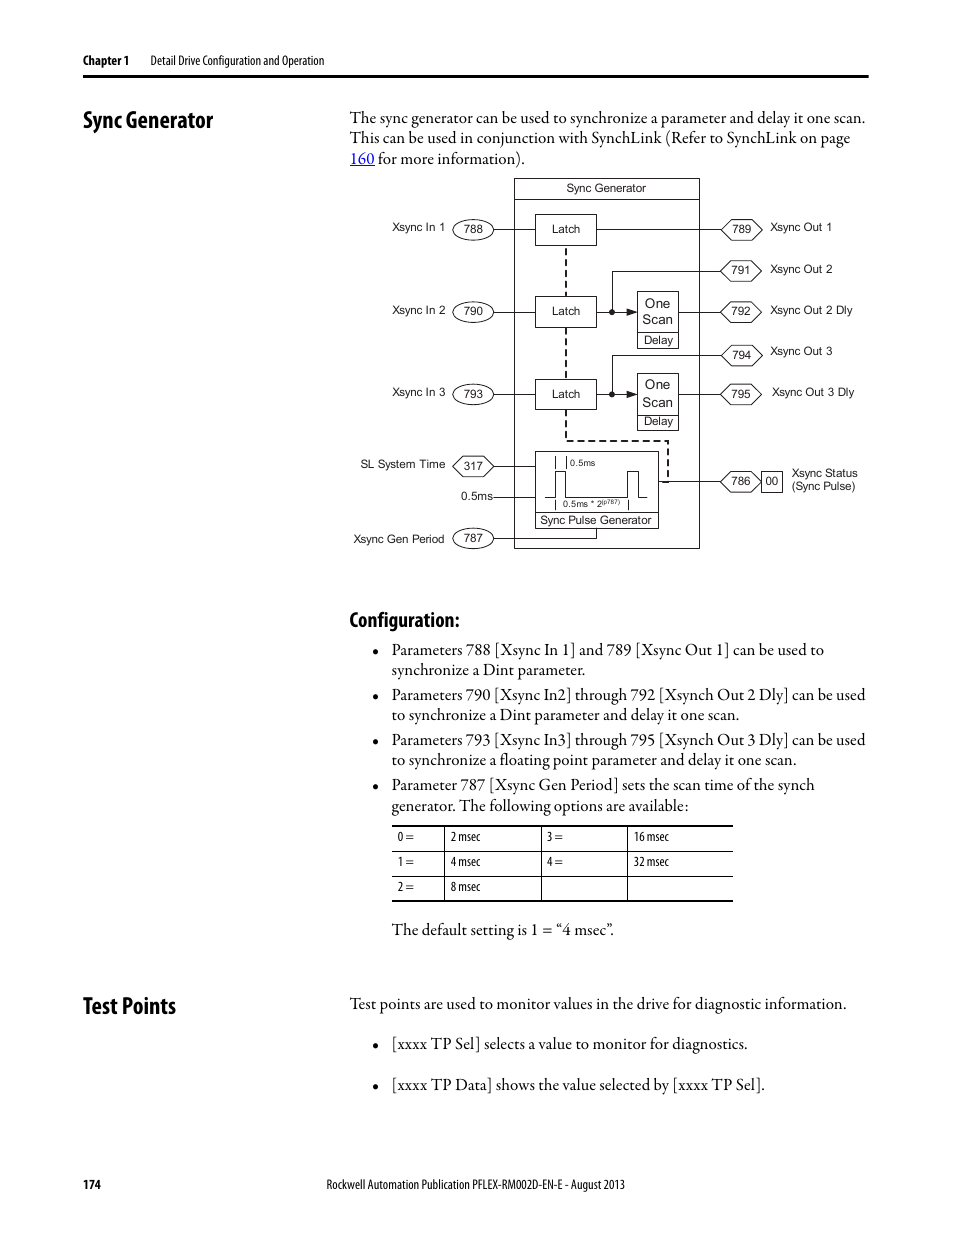 Sync generator, Configuration, Test points | Rockwell Automation 20D PowerFlex 700S with Phase I Control Reference Manual User Manual | Page 174 / 190